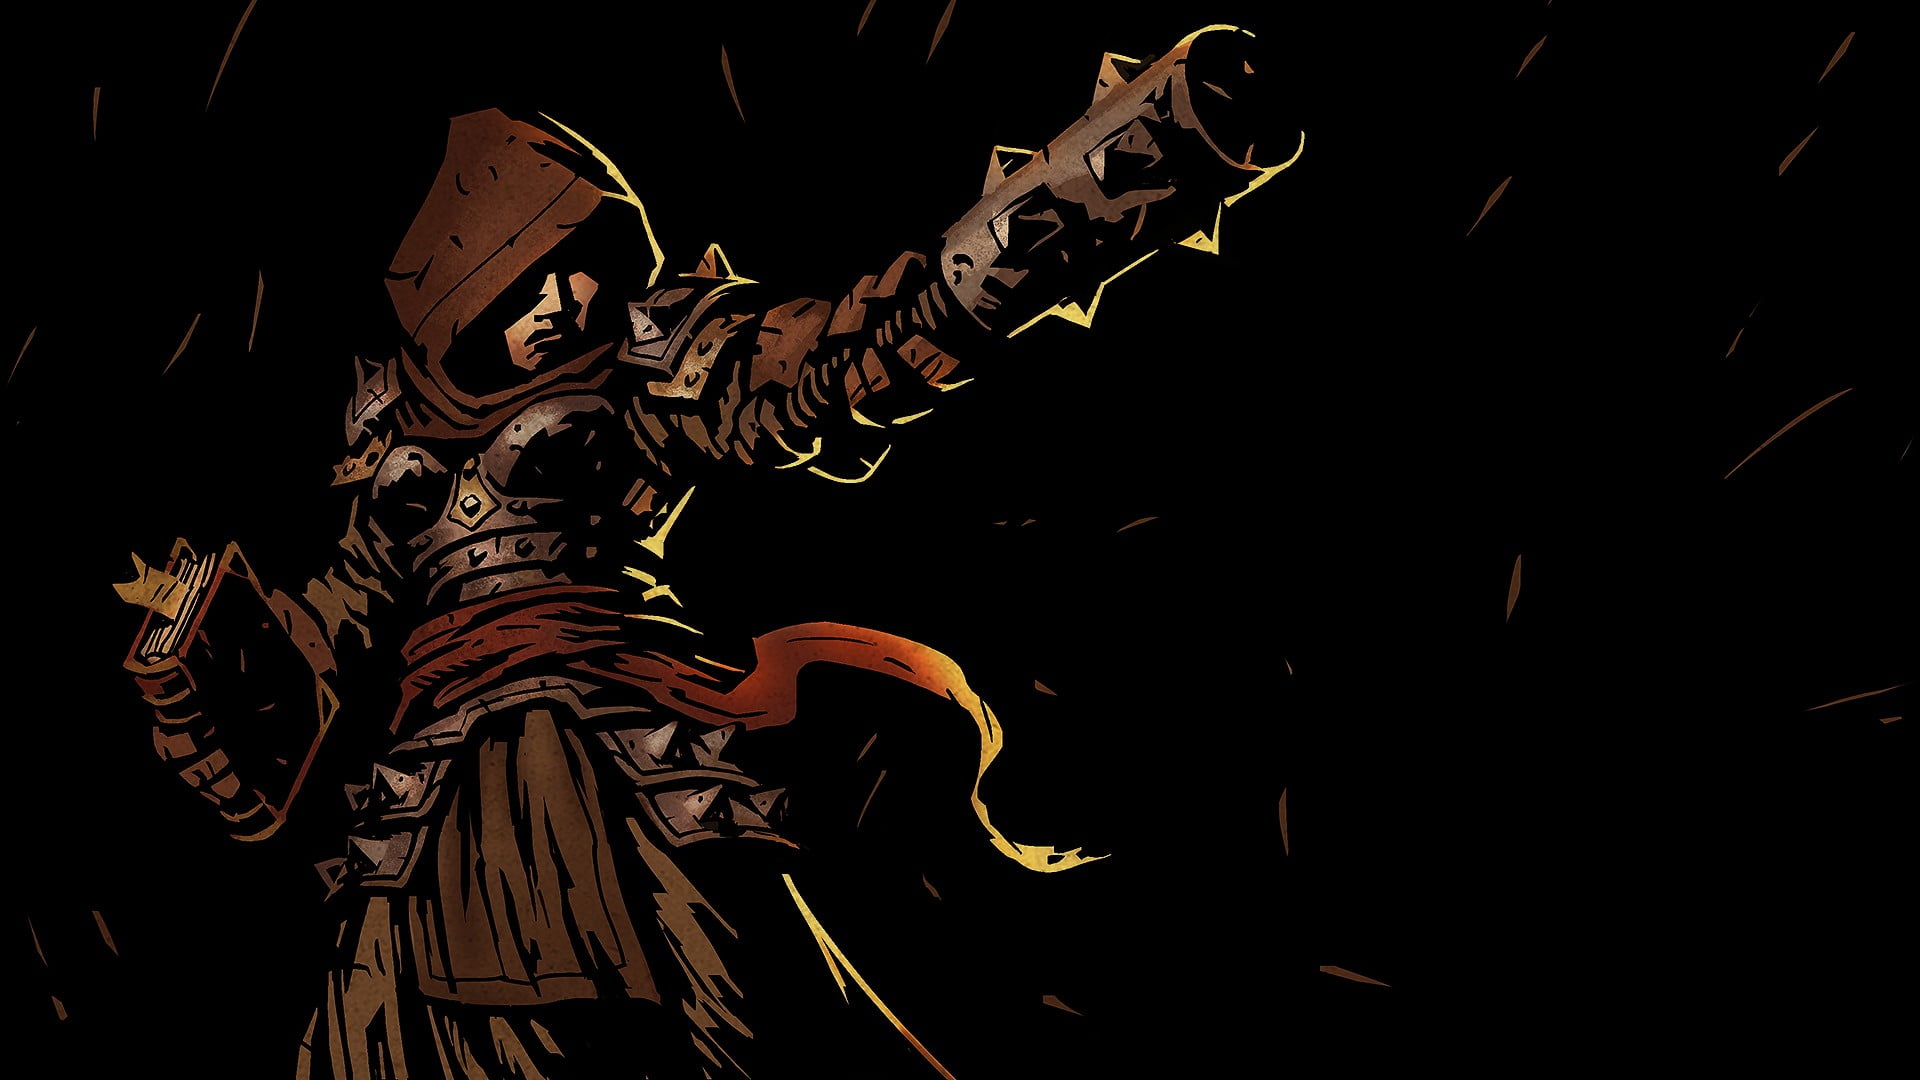 Person Wearing Suit And Hood Holding Mace Artwork Darkest Dungeon Images, Photos, Reviews